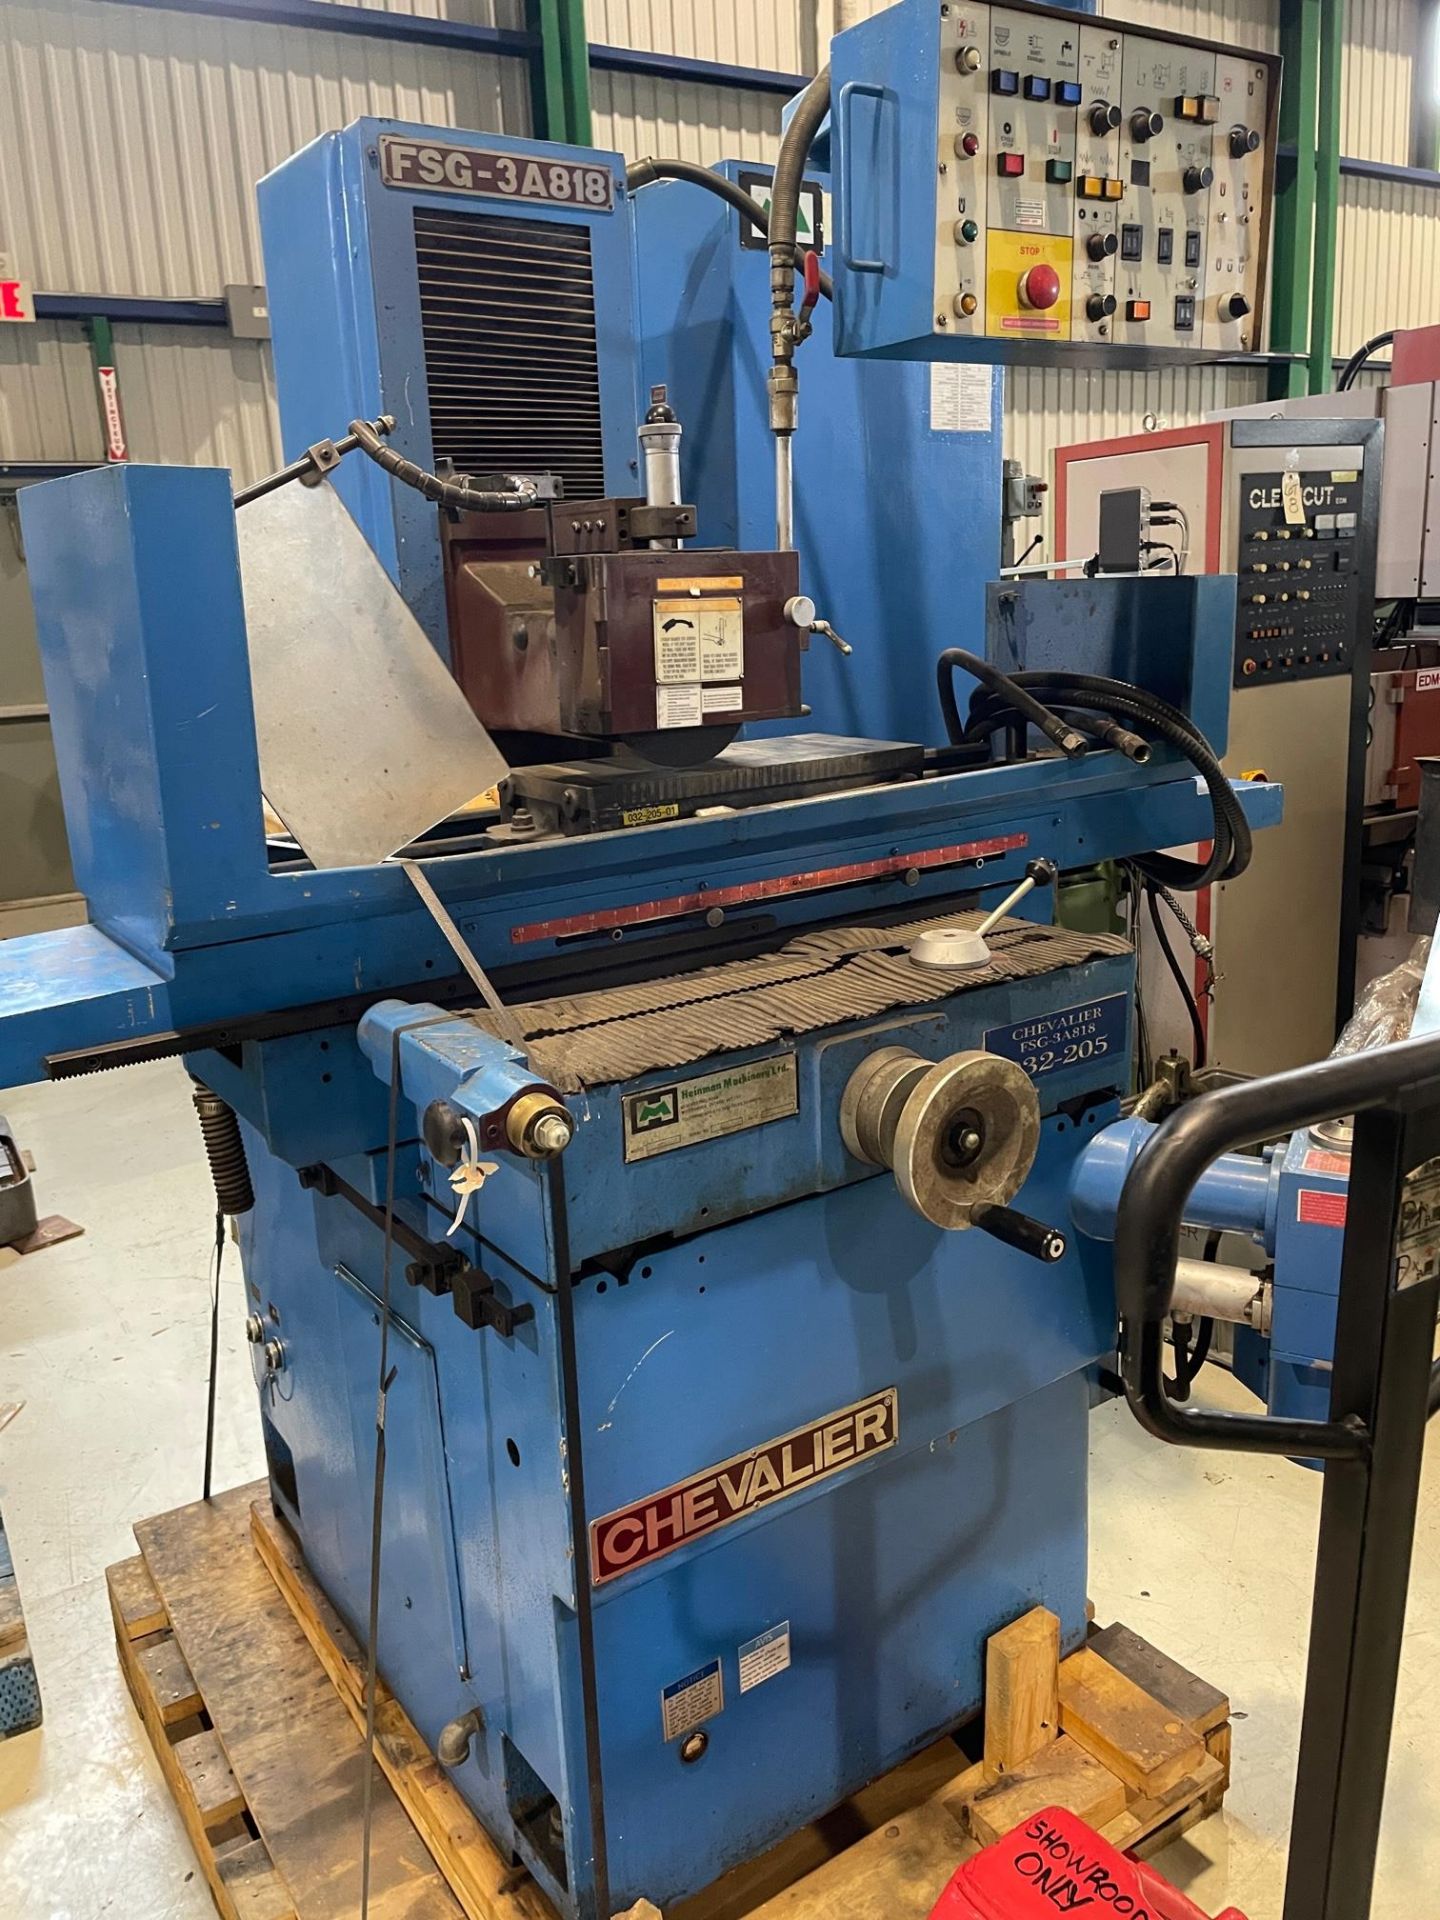 CHEVALIER SURFACE GRINDER, MDL FSG-30818, S/N M384B004, 8'' X 18'' CHUCK, LOCATION, MONTREAL, - Image 3 of 3